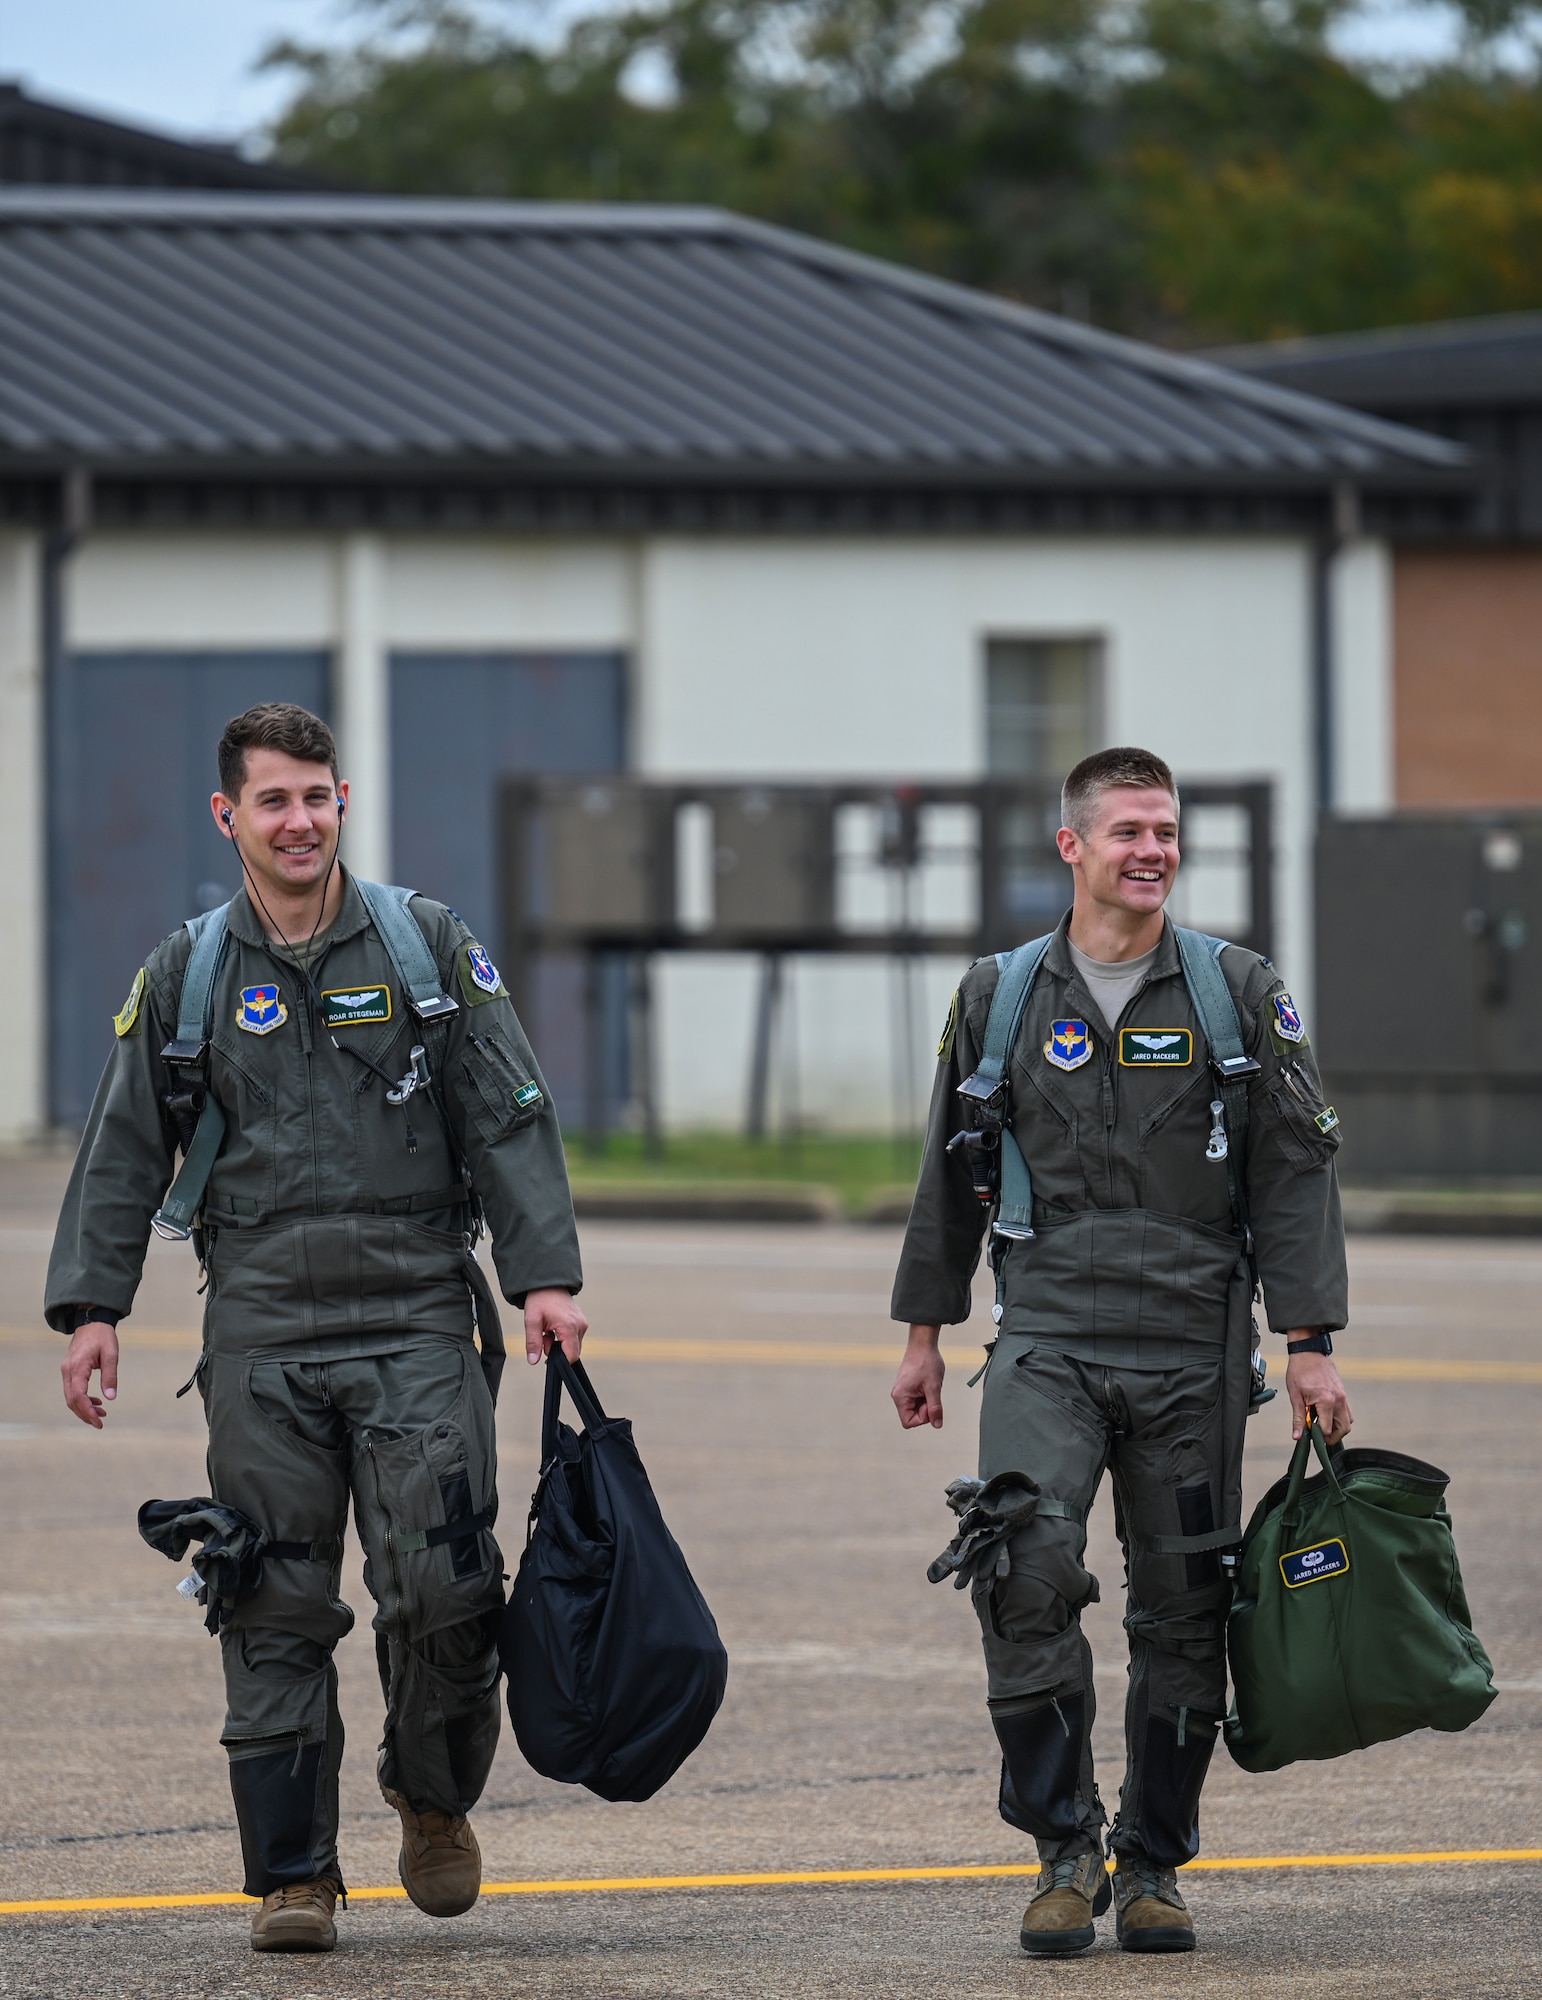 U.S. Air Force Capt. Cole Stegeman (left), 49th Fighter Training Squadron instructor pilot, and 1st Lt. Jared Rackers, 49th FTS Introduction to Fighter Fundamentals graduate, walk towards a T-38 Talon Nov. 11, 2020, on Columbus Air Force Base, Miss. Stegeman and Rackers are both assigned to the same type of aircraft, the F-15 Eagle. (U.S. Air Force photo by Airman 1st Class Davis Donaldson)